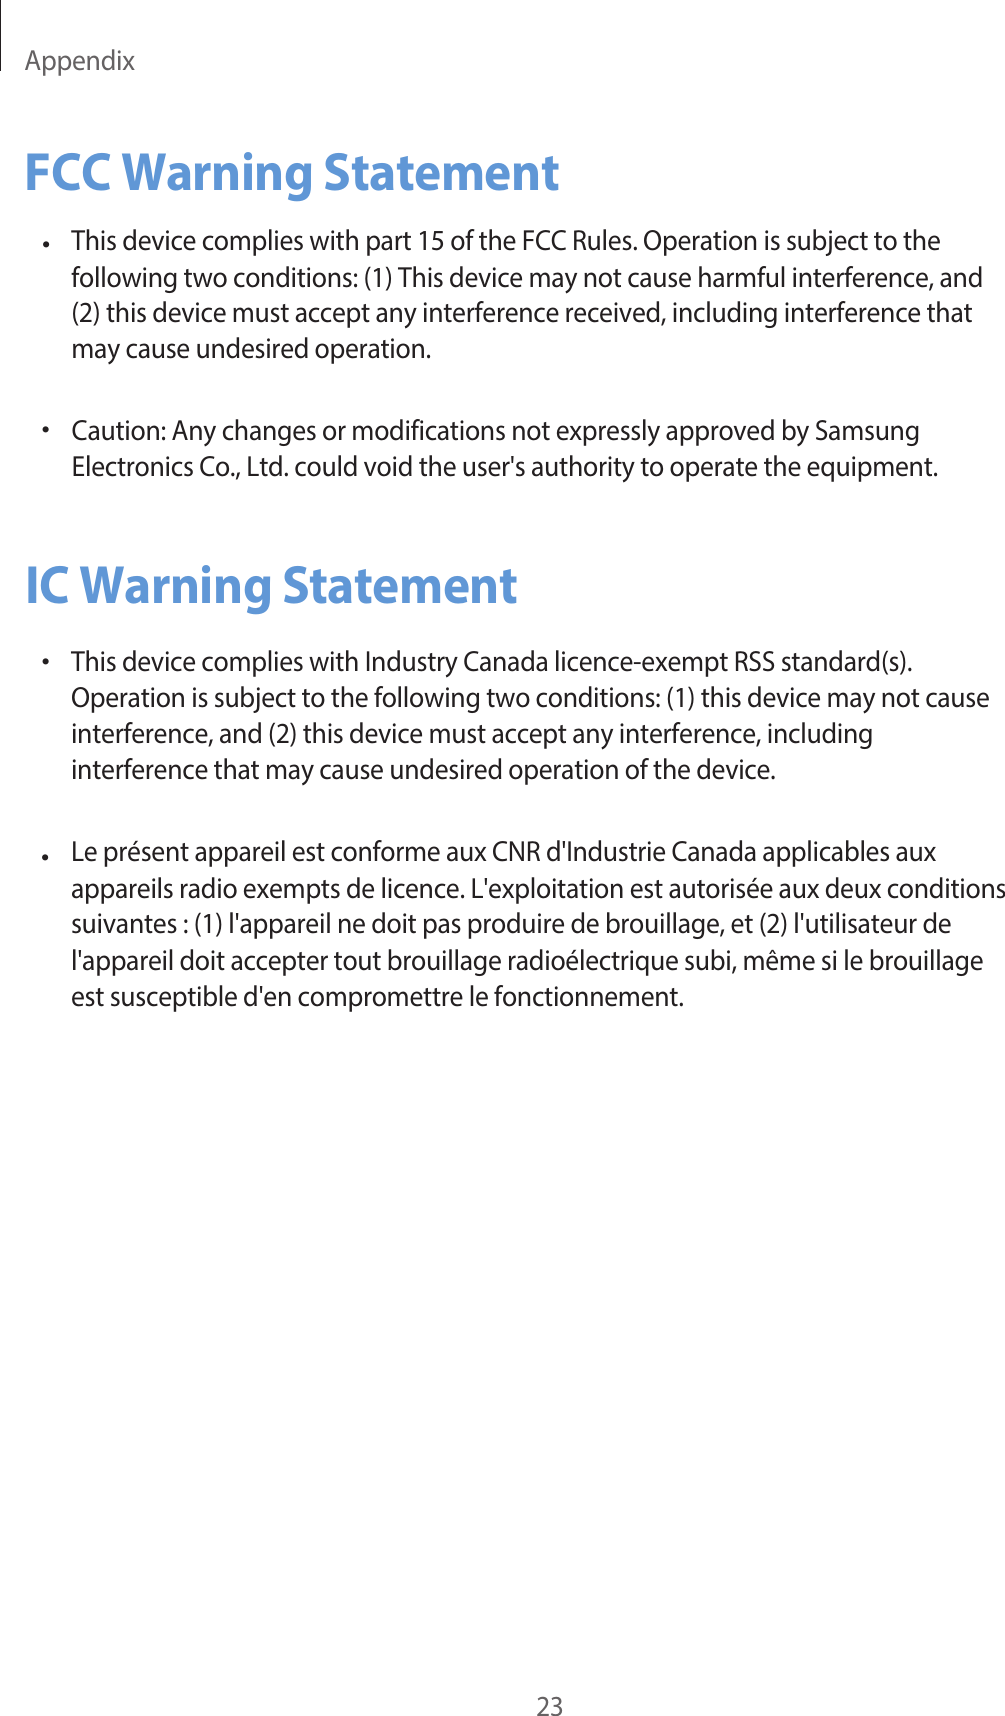 Appendix23FCC Warning Statement•This device complies with part 15 of the FCC Rules. Operation is subject to the following two conditions: (1) This device may not cause harmful interference, and (2) this device must accept any interference received, including interference that may cause undesired operation.Caution: Any changes or modifications not expressly approved by Samsung Electronics Co., Ltd. could void the user&apos;s authority to operate the equipment.•IC Warning Statement•This device complies with Industry Canada licence-exempt RSS standard(s).Operation is subject to the following two conditions: ( 1) this device may not  causeinterference, and (2) this device must accept any interference,  includinginterference that may cause undesired operation of the device.Le présent appareil est conforme aux CNR d&apos;Industrie Canada applicables aux appareils radio exempts de licence. L&apos;exploitation est autorisée aux deux conditions suivantes : (1) l&apos;appareil ne doit pas produire de brouillage, et (2) l&apos;utilisateur  de l&apos;appareil doit accepter tout brouillage radioélectrique subi, même si le brouillage es t susceptible d&apos;en compromettre le fonctionnement.•